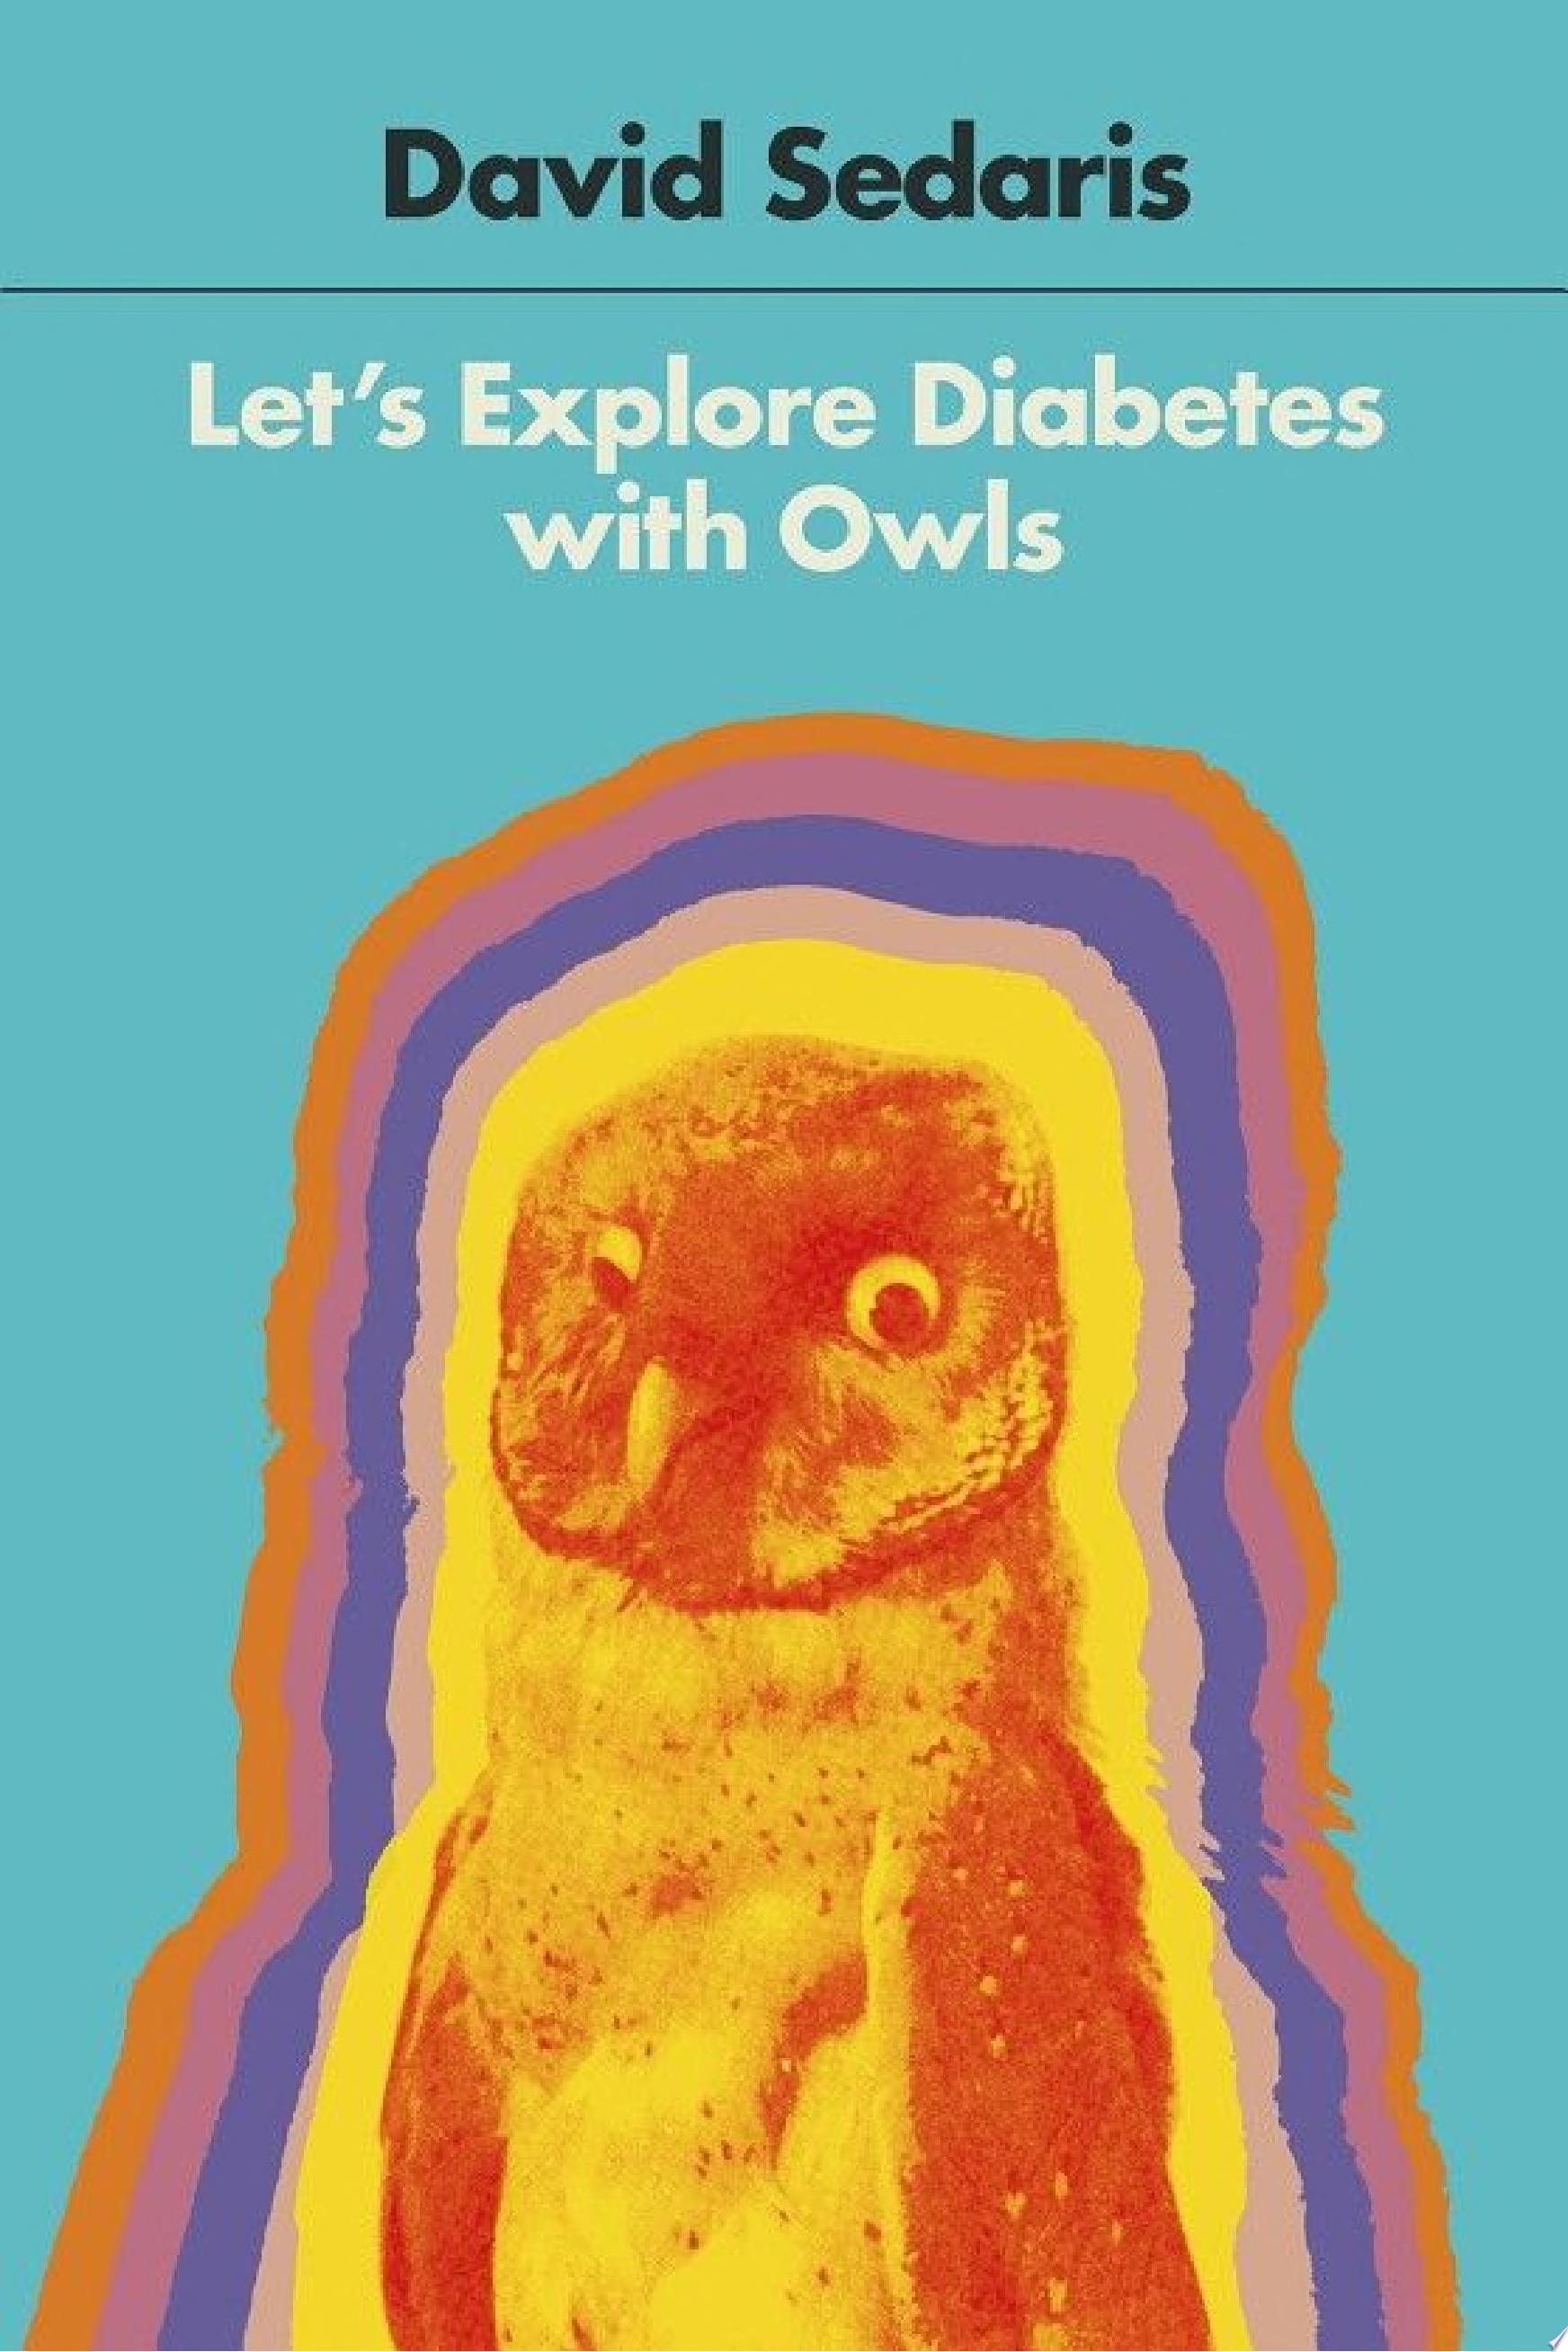 Image for "Let's Explore Diabetes with Owls"